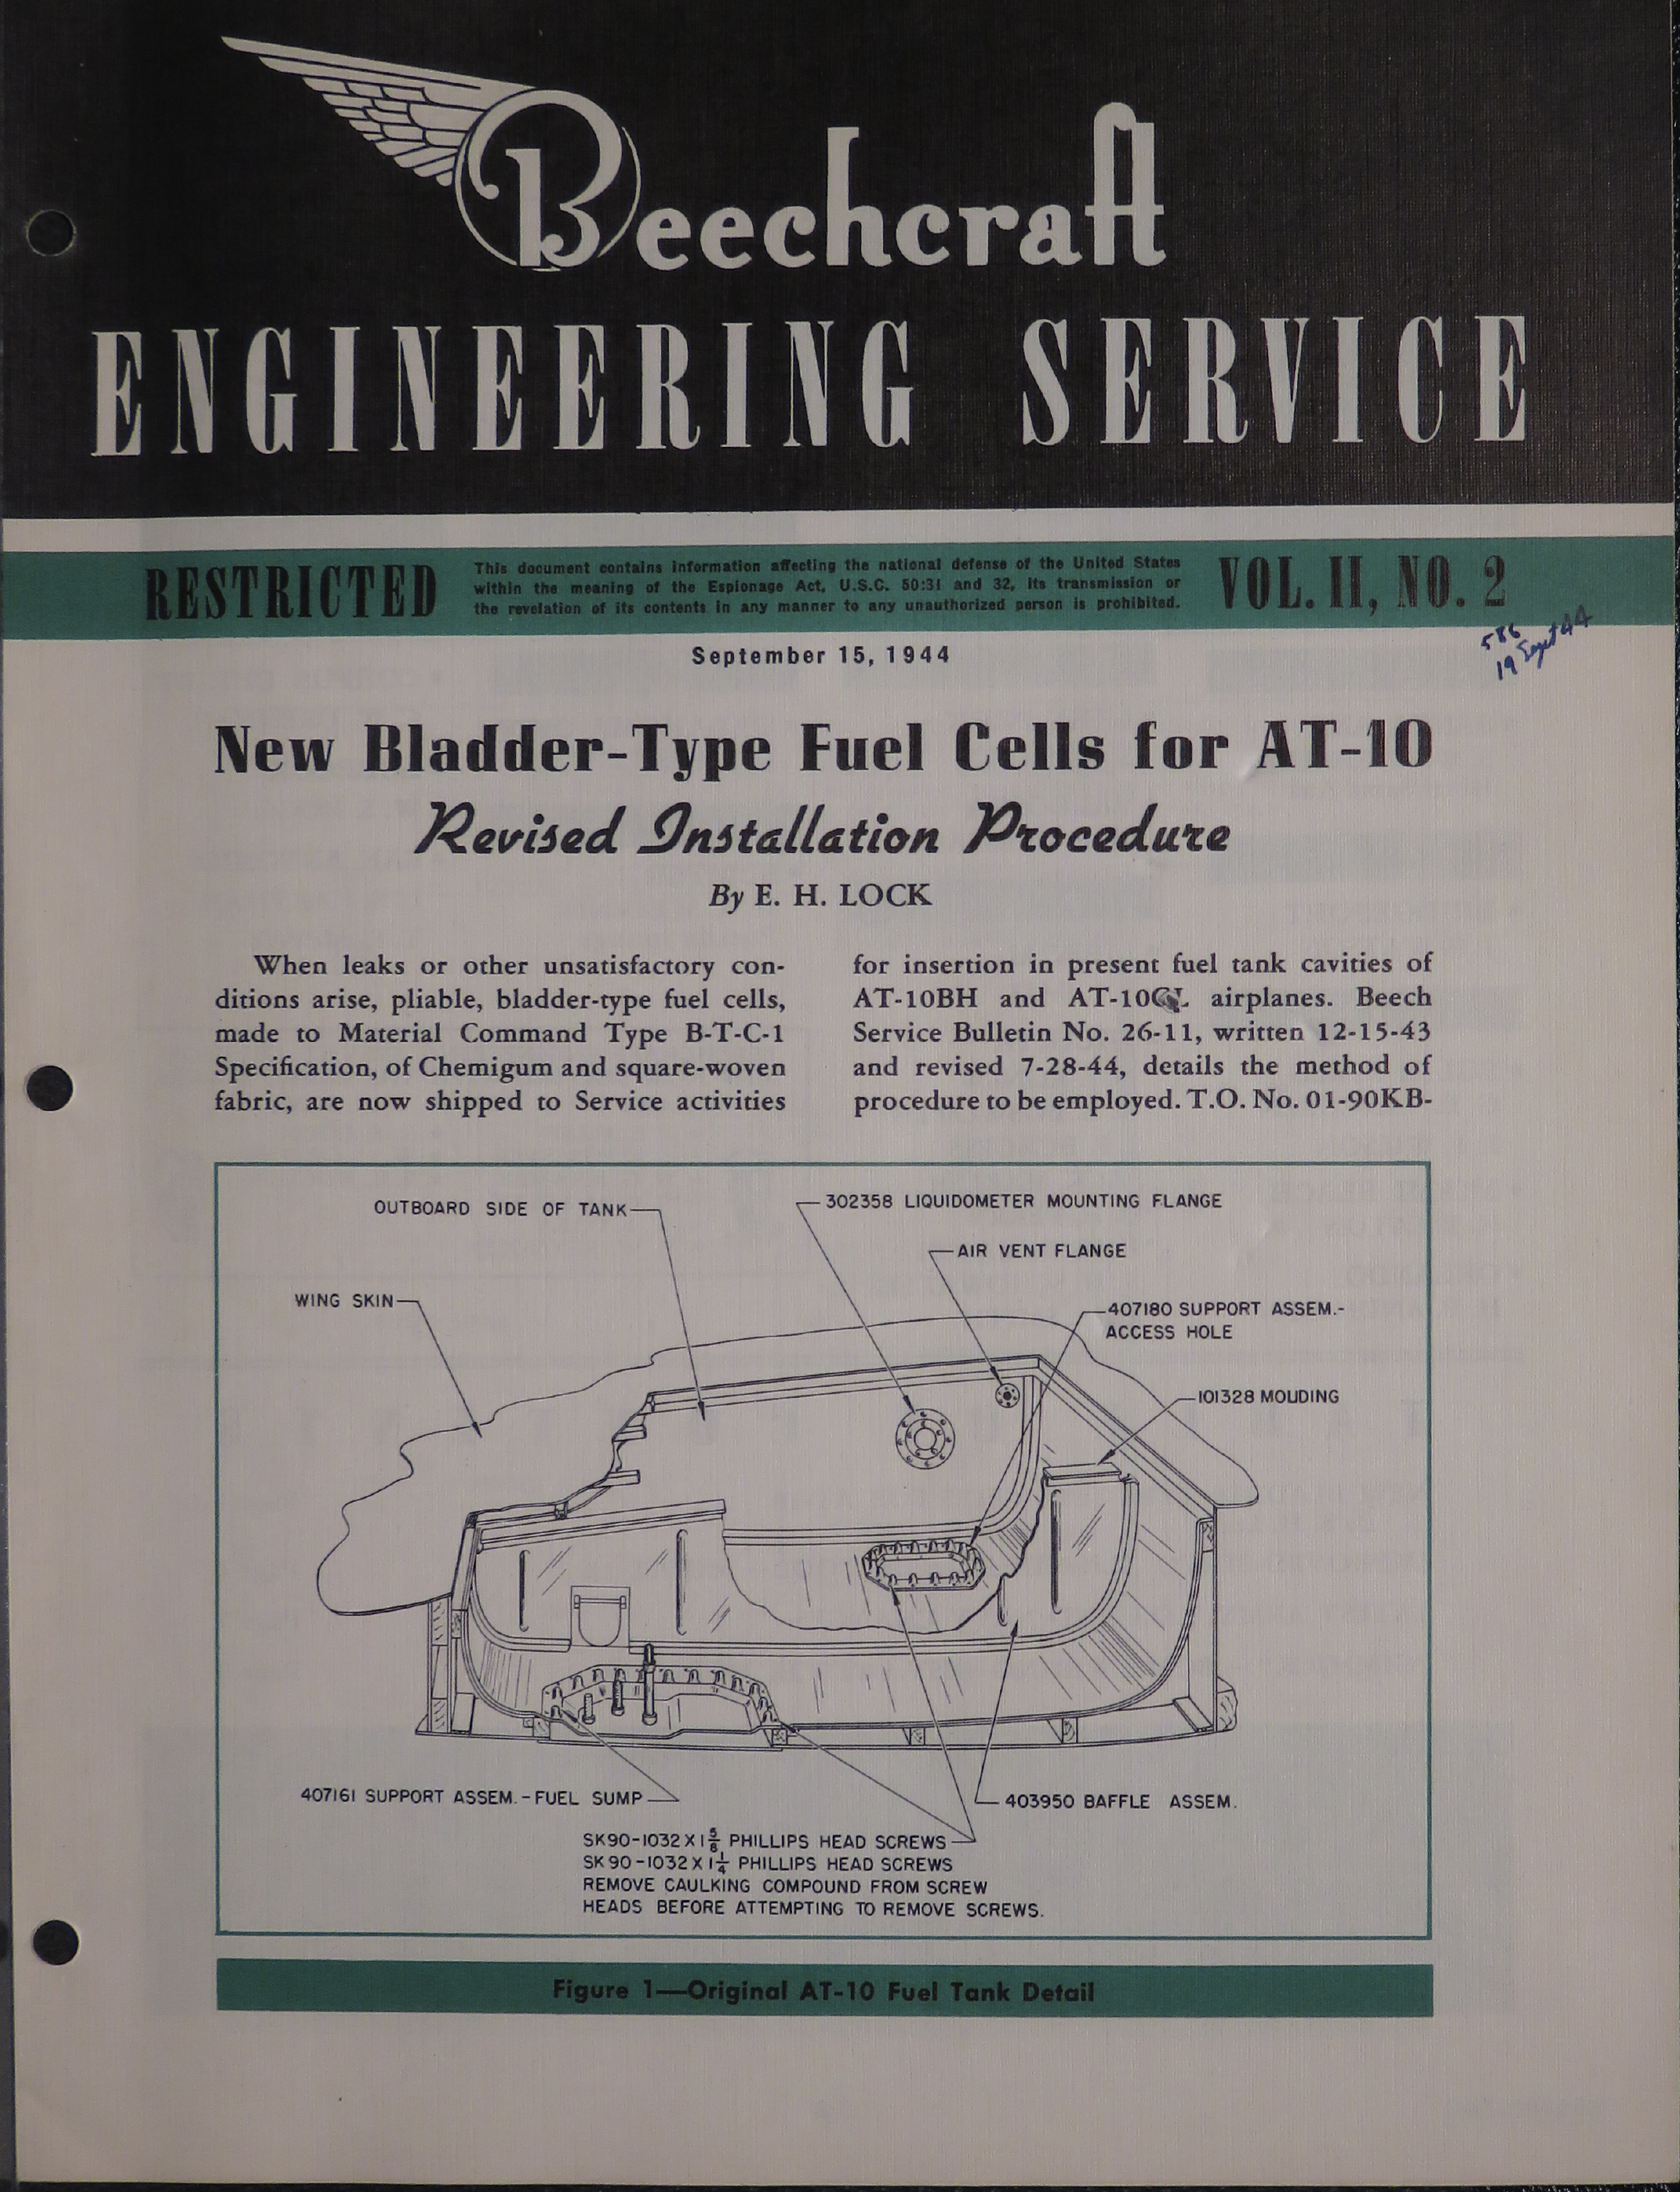 Sample page 1 from AirCorps Library document: Vol. II, No. 2 - Beechcraft Engineering Service